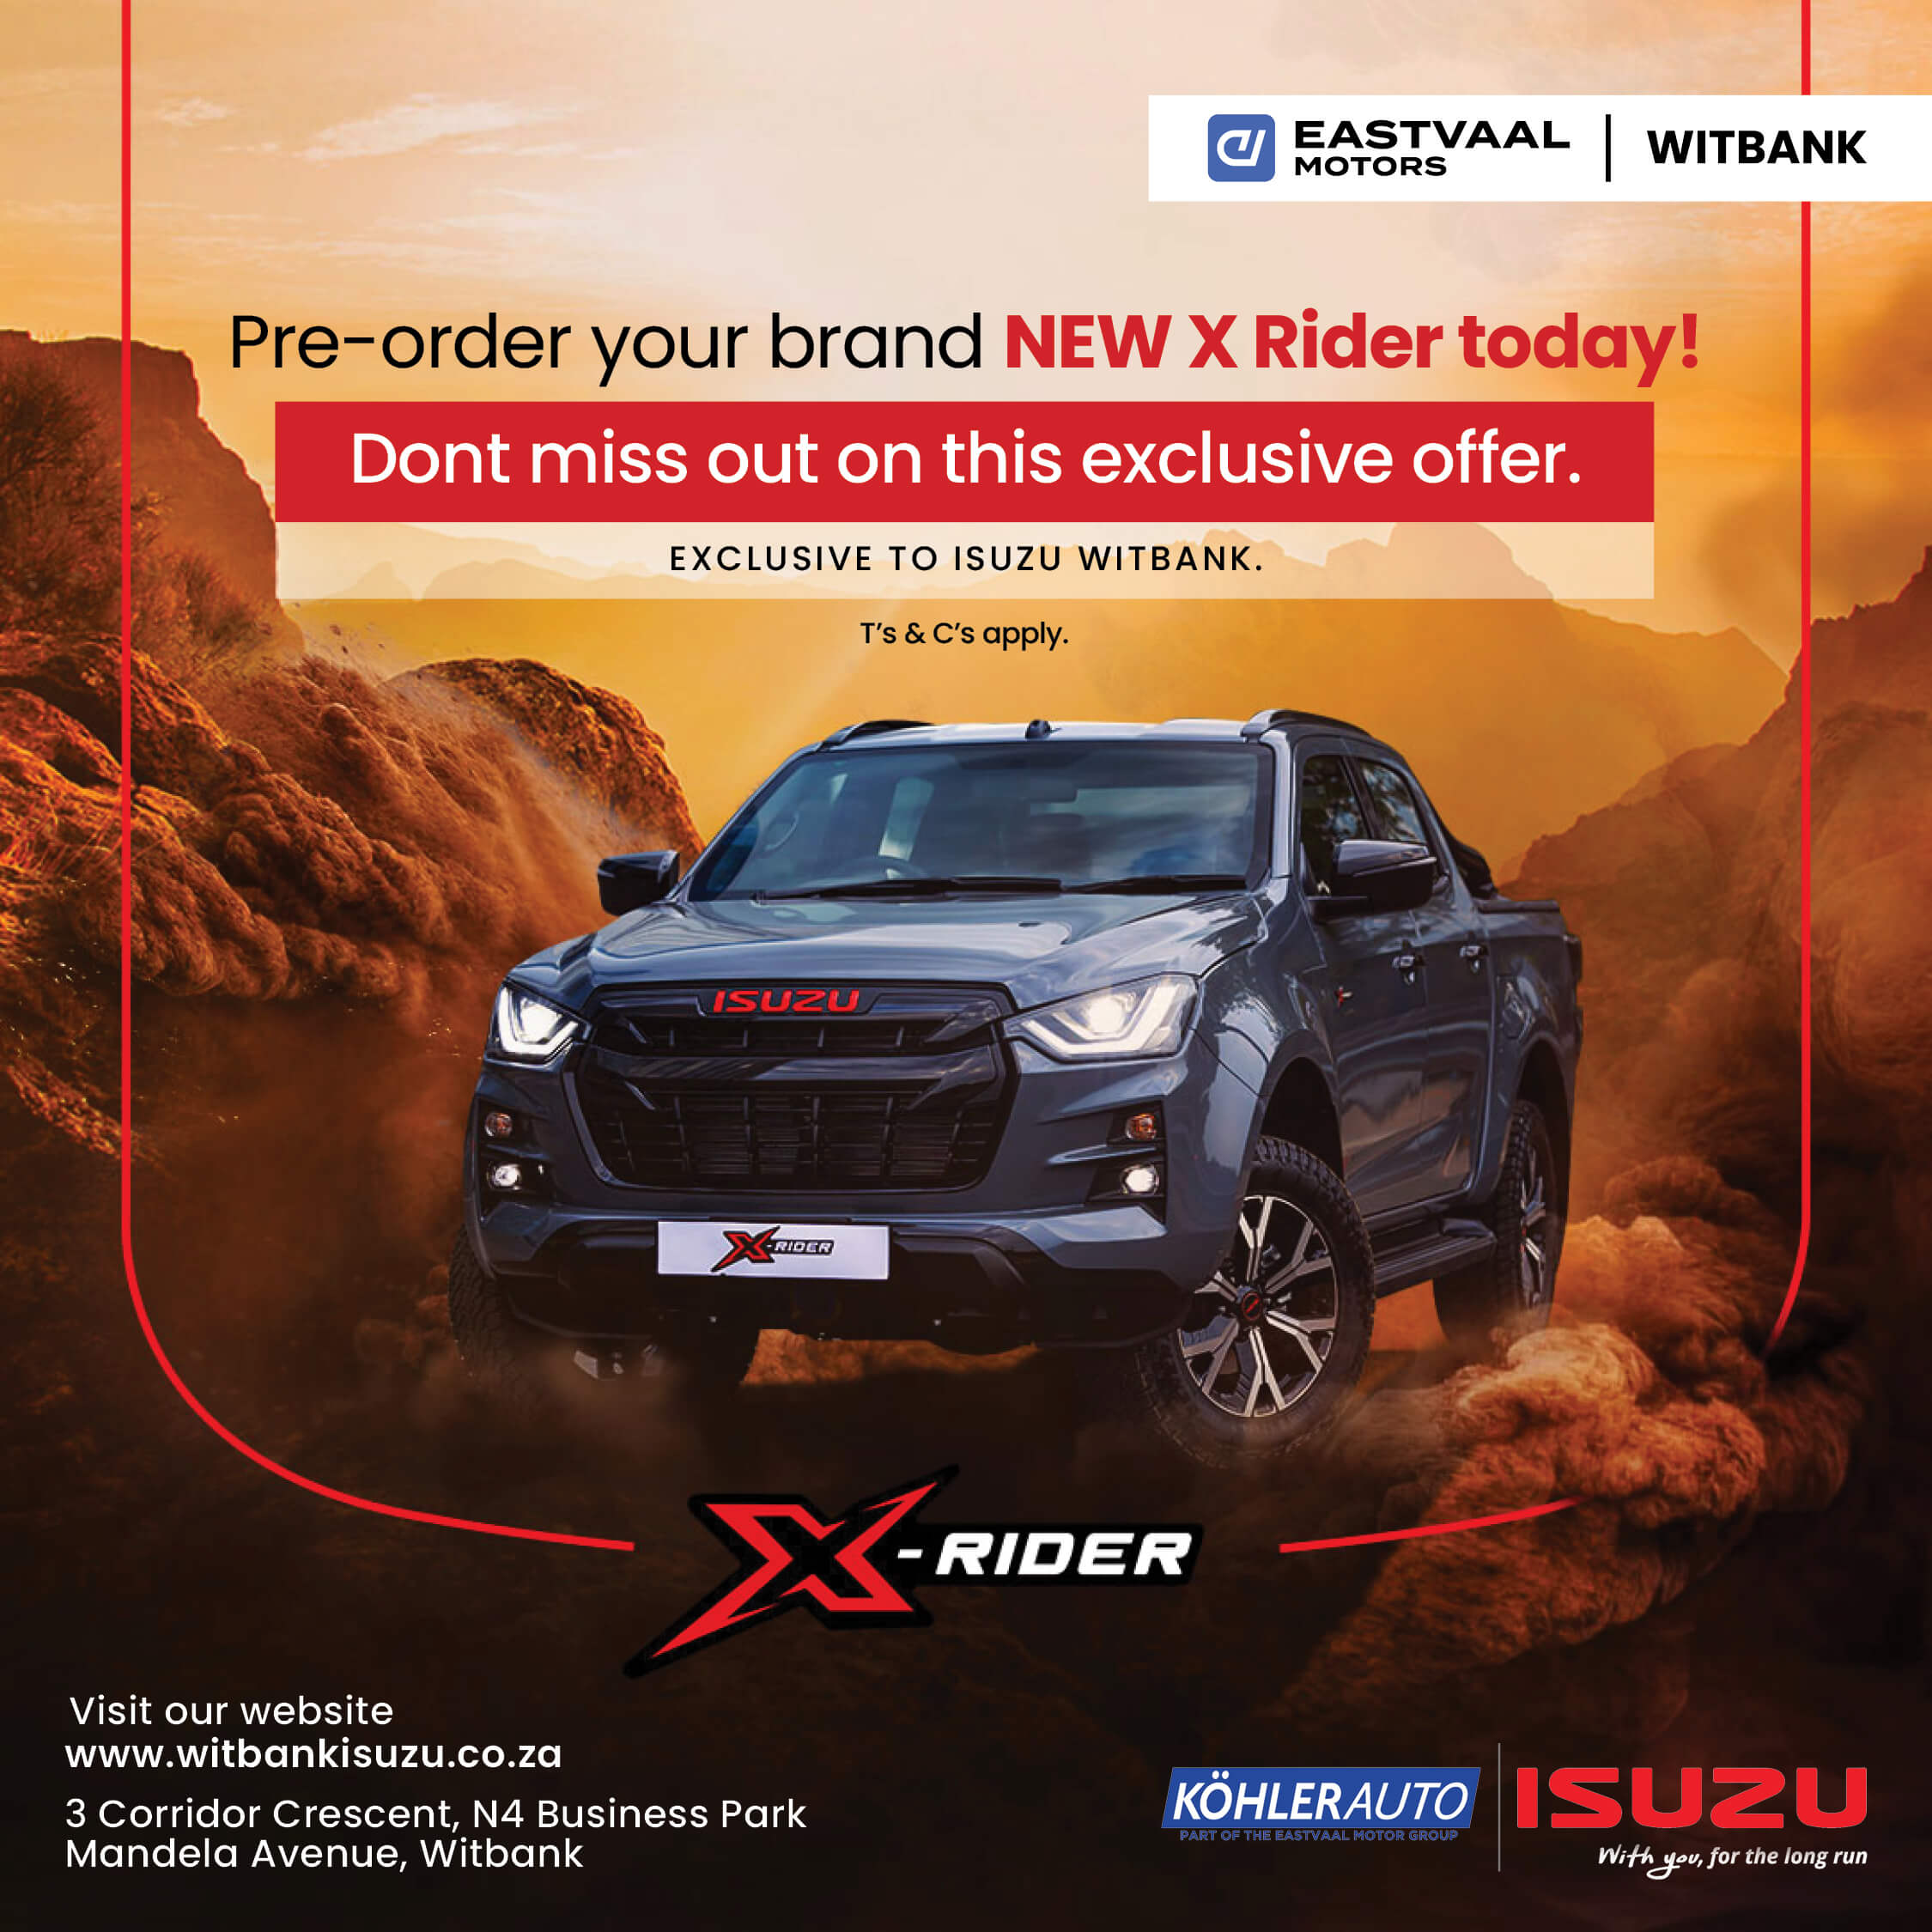 Pre-order your brand NEW X Rider today image from Eastvaal Motors